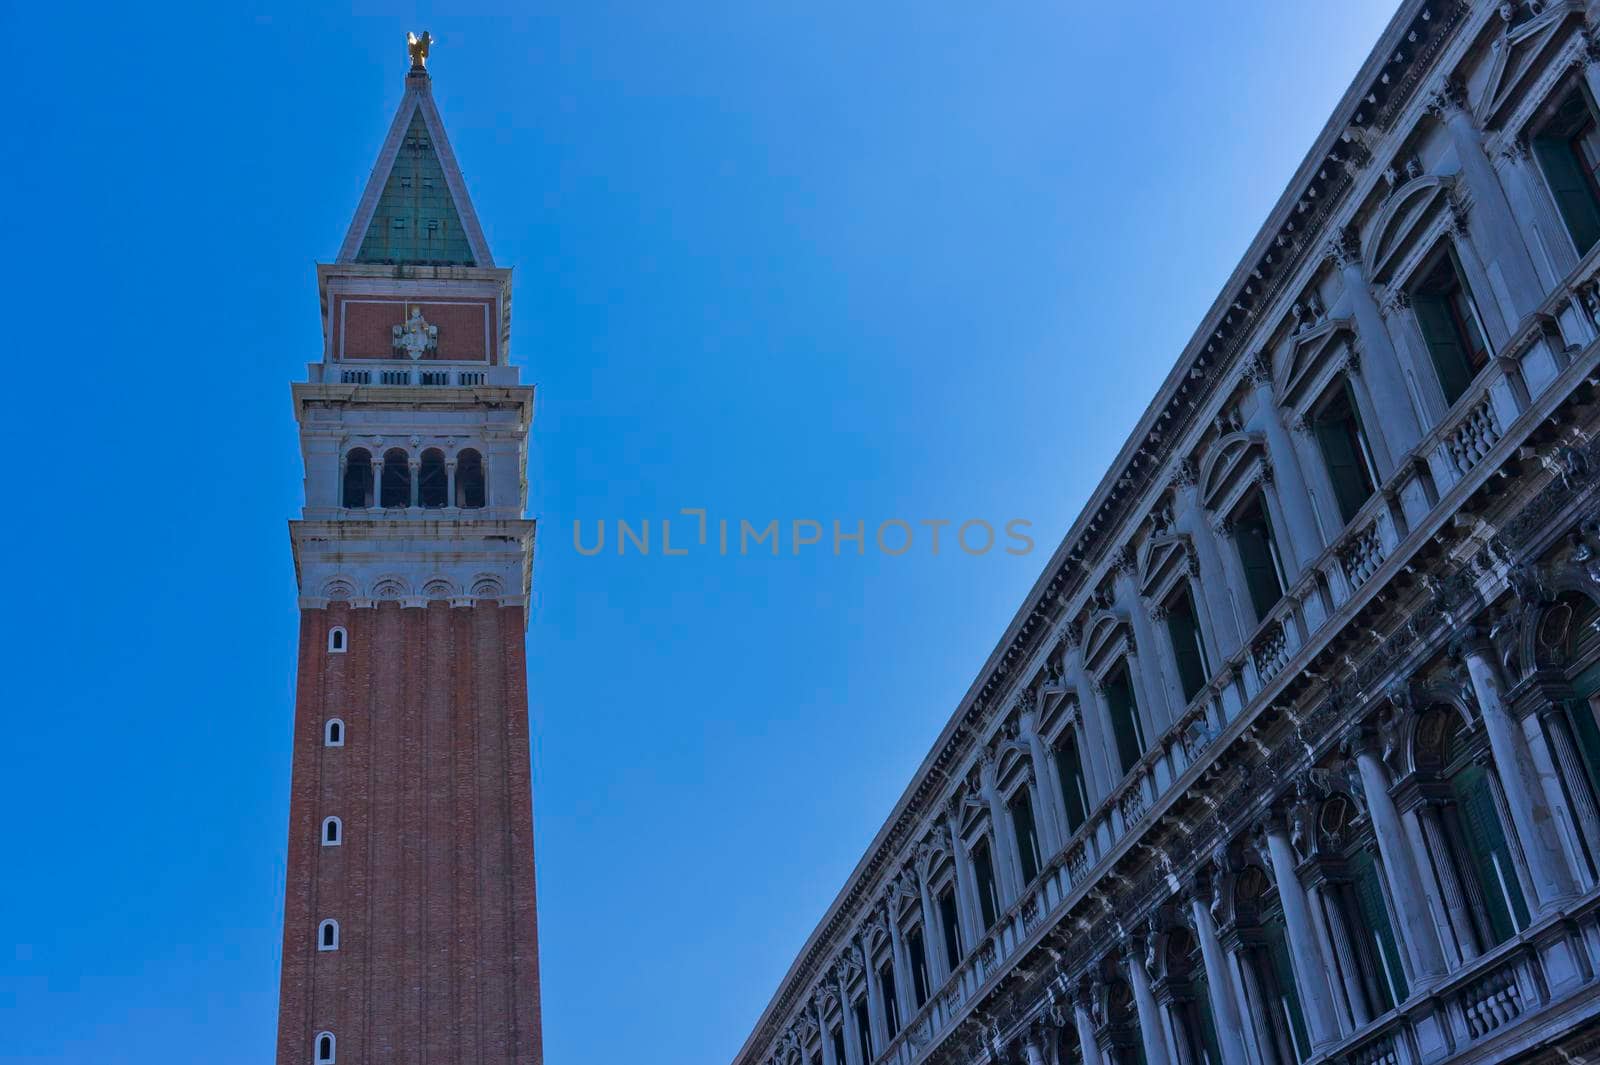 Venice, San Marco Square, Old city view, Italy, Europe